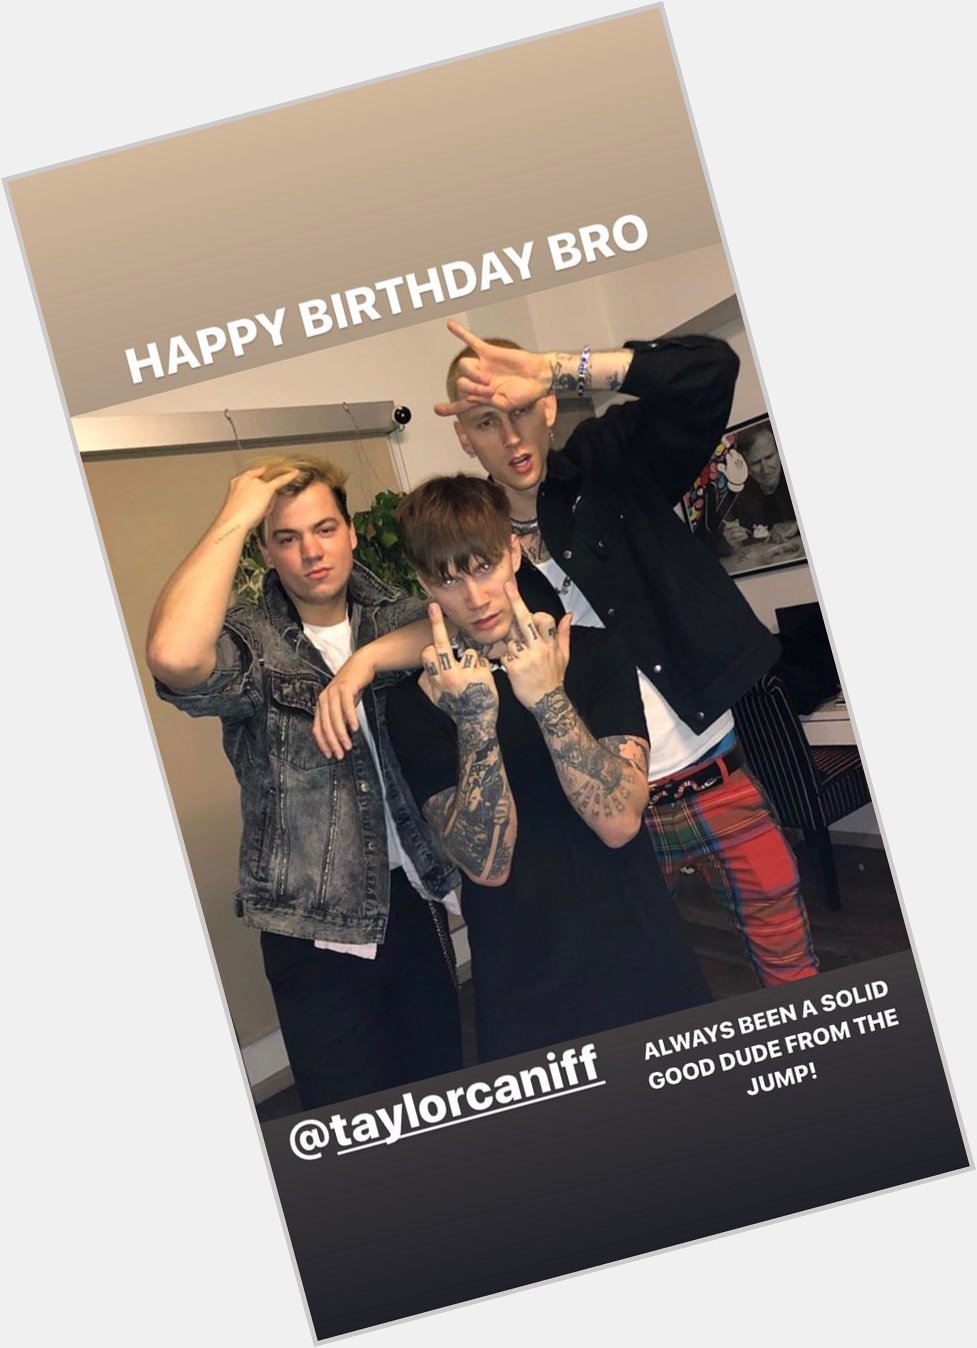 Rook wishing Taylor Caniff a Happy Birthday :)
//IG Story: rookxx// 